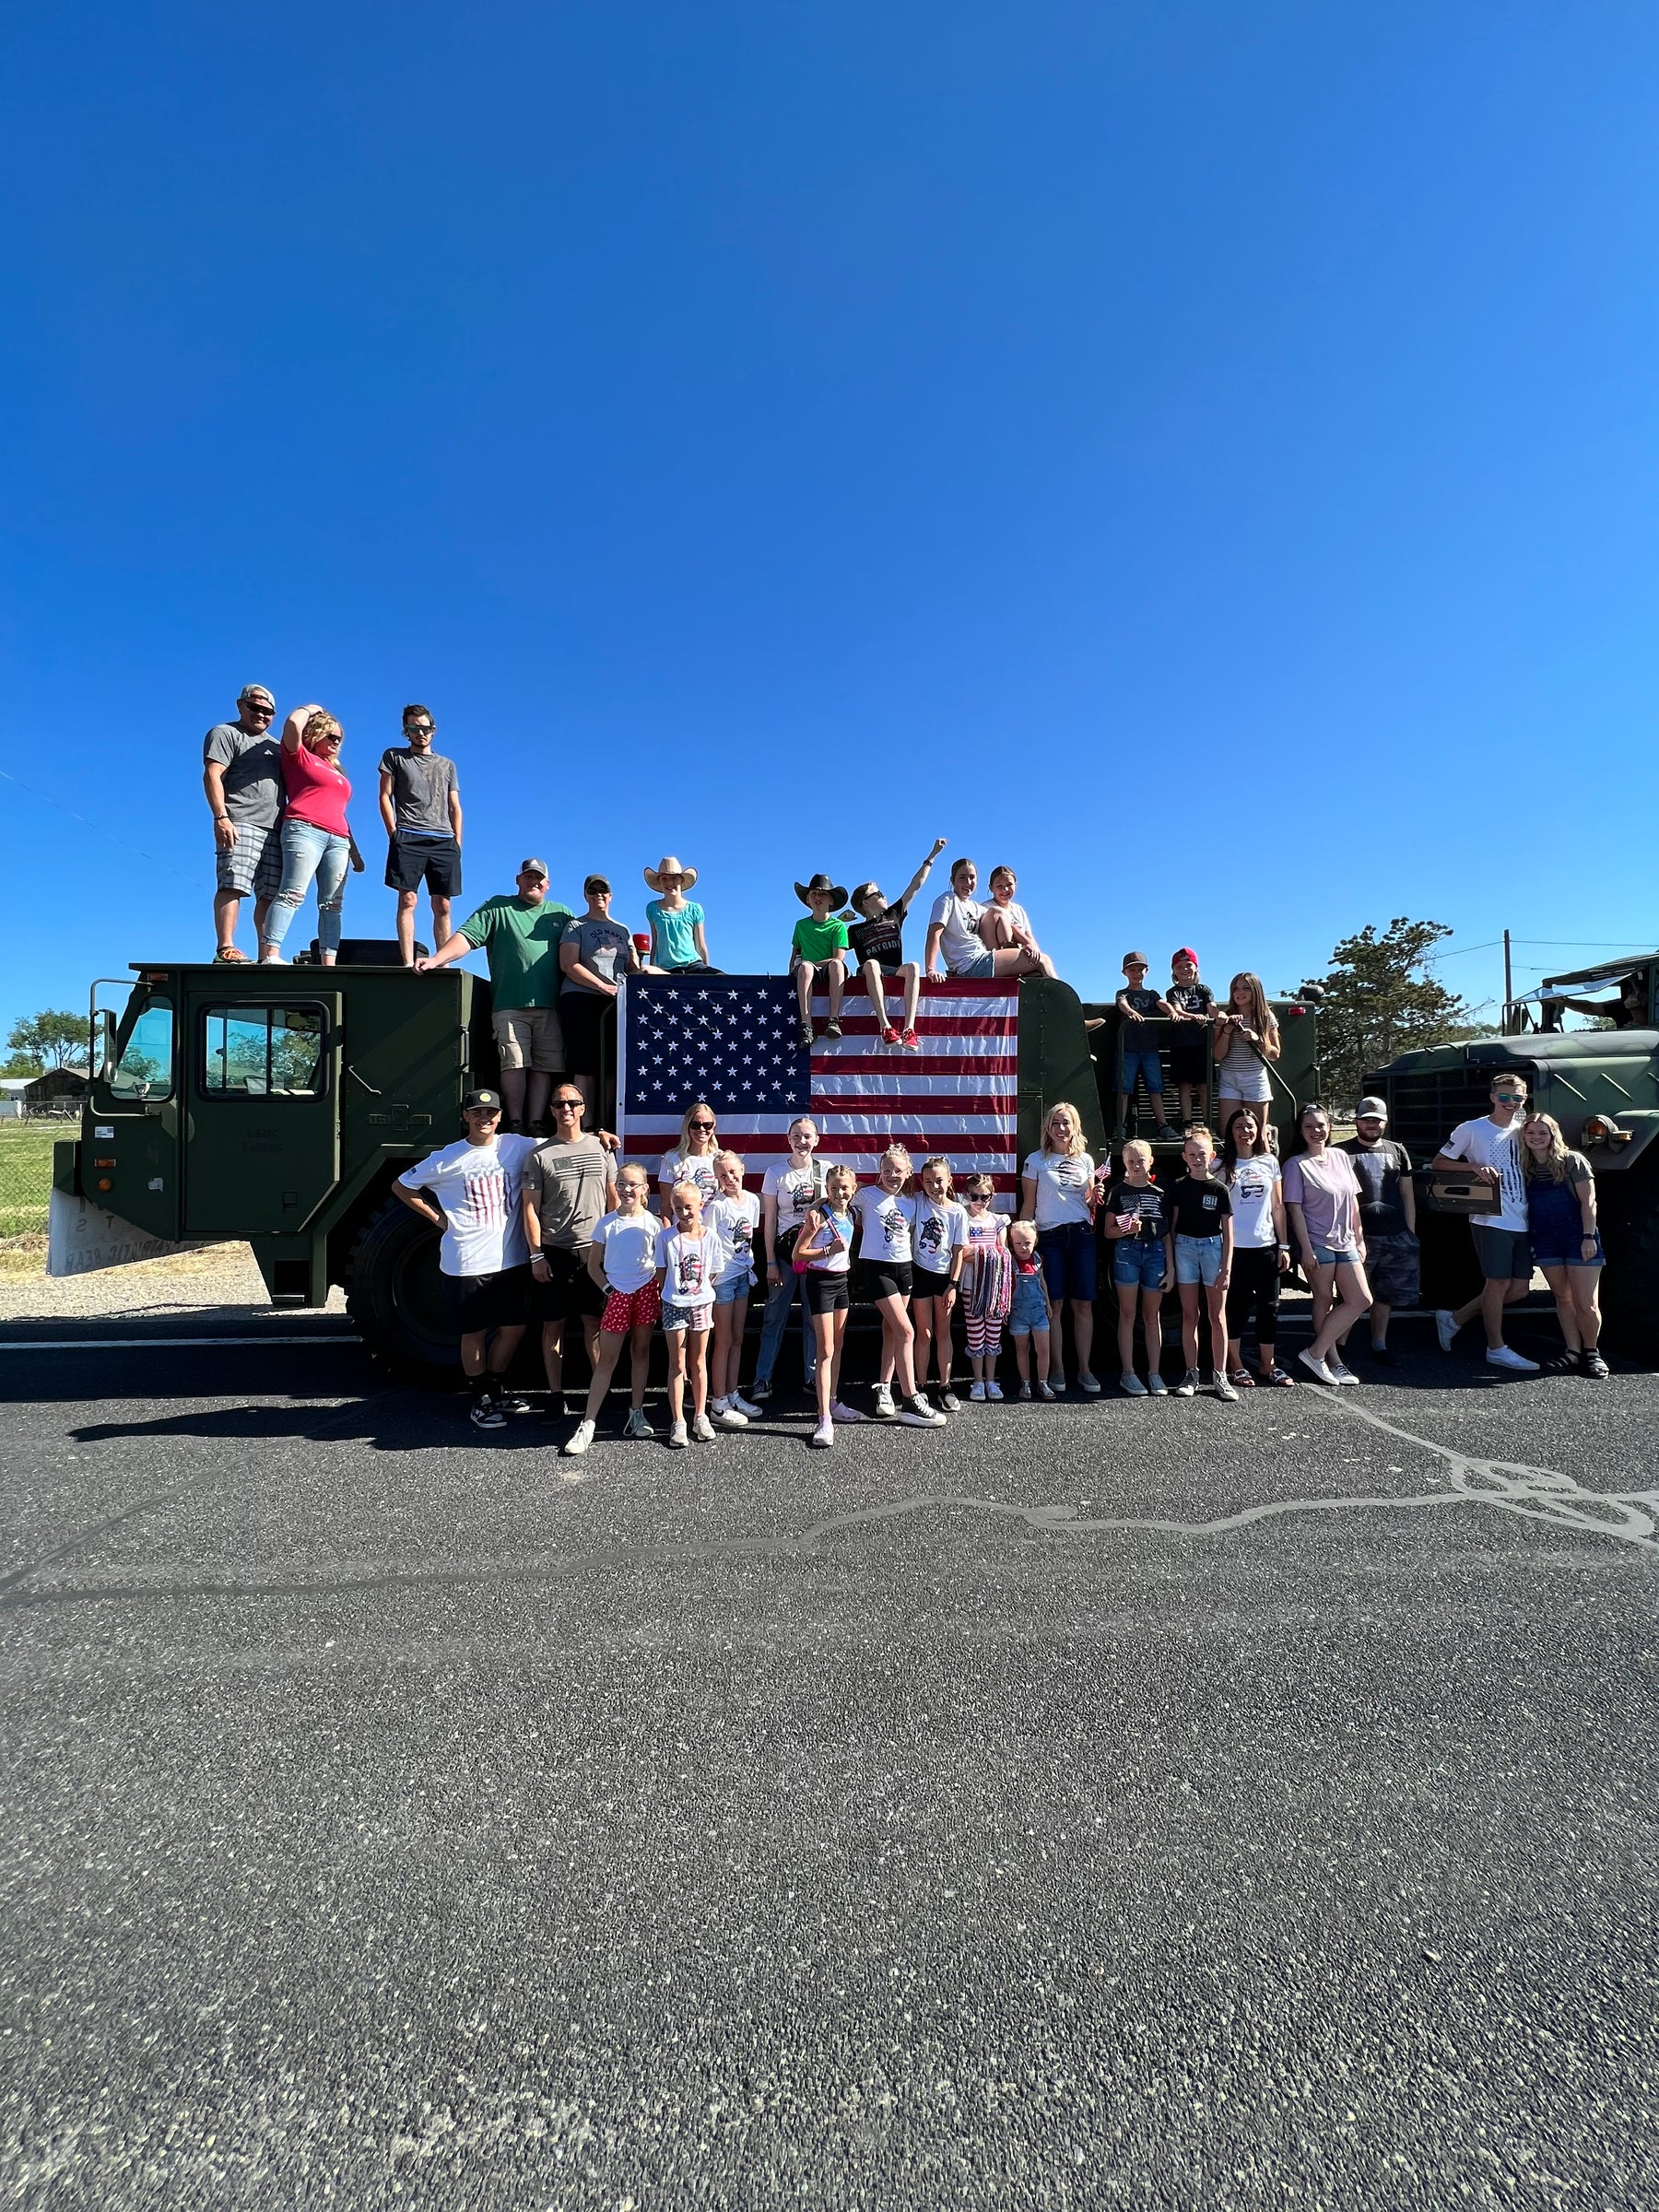 Picture of parade participants in Herriman Utah celebrating freeedom in front of large military truck